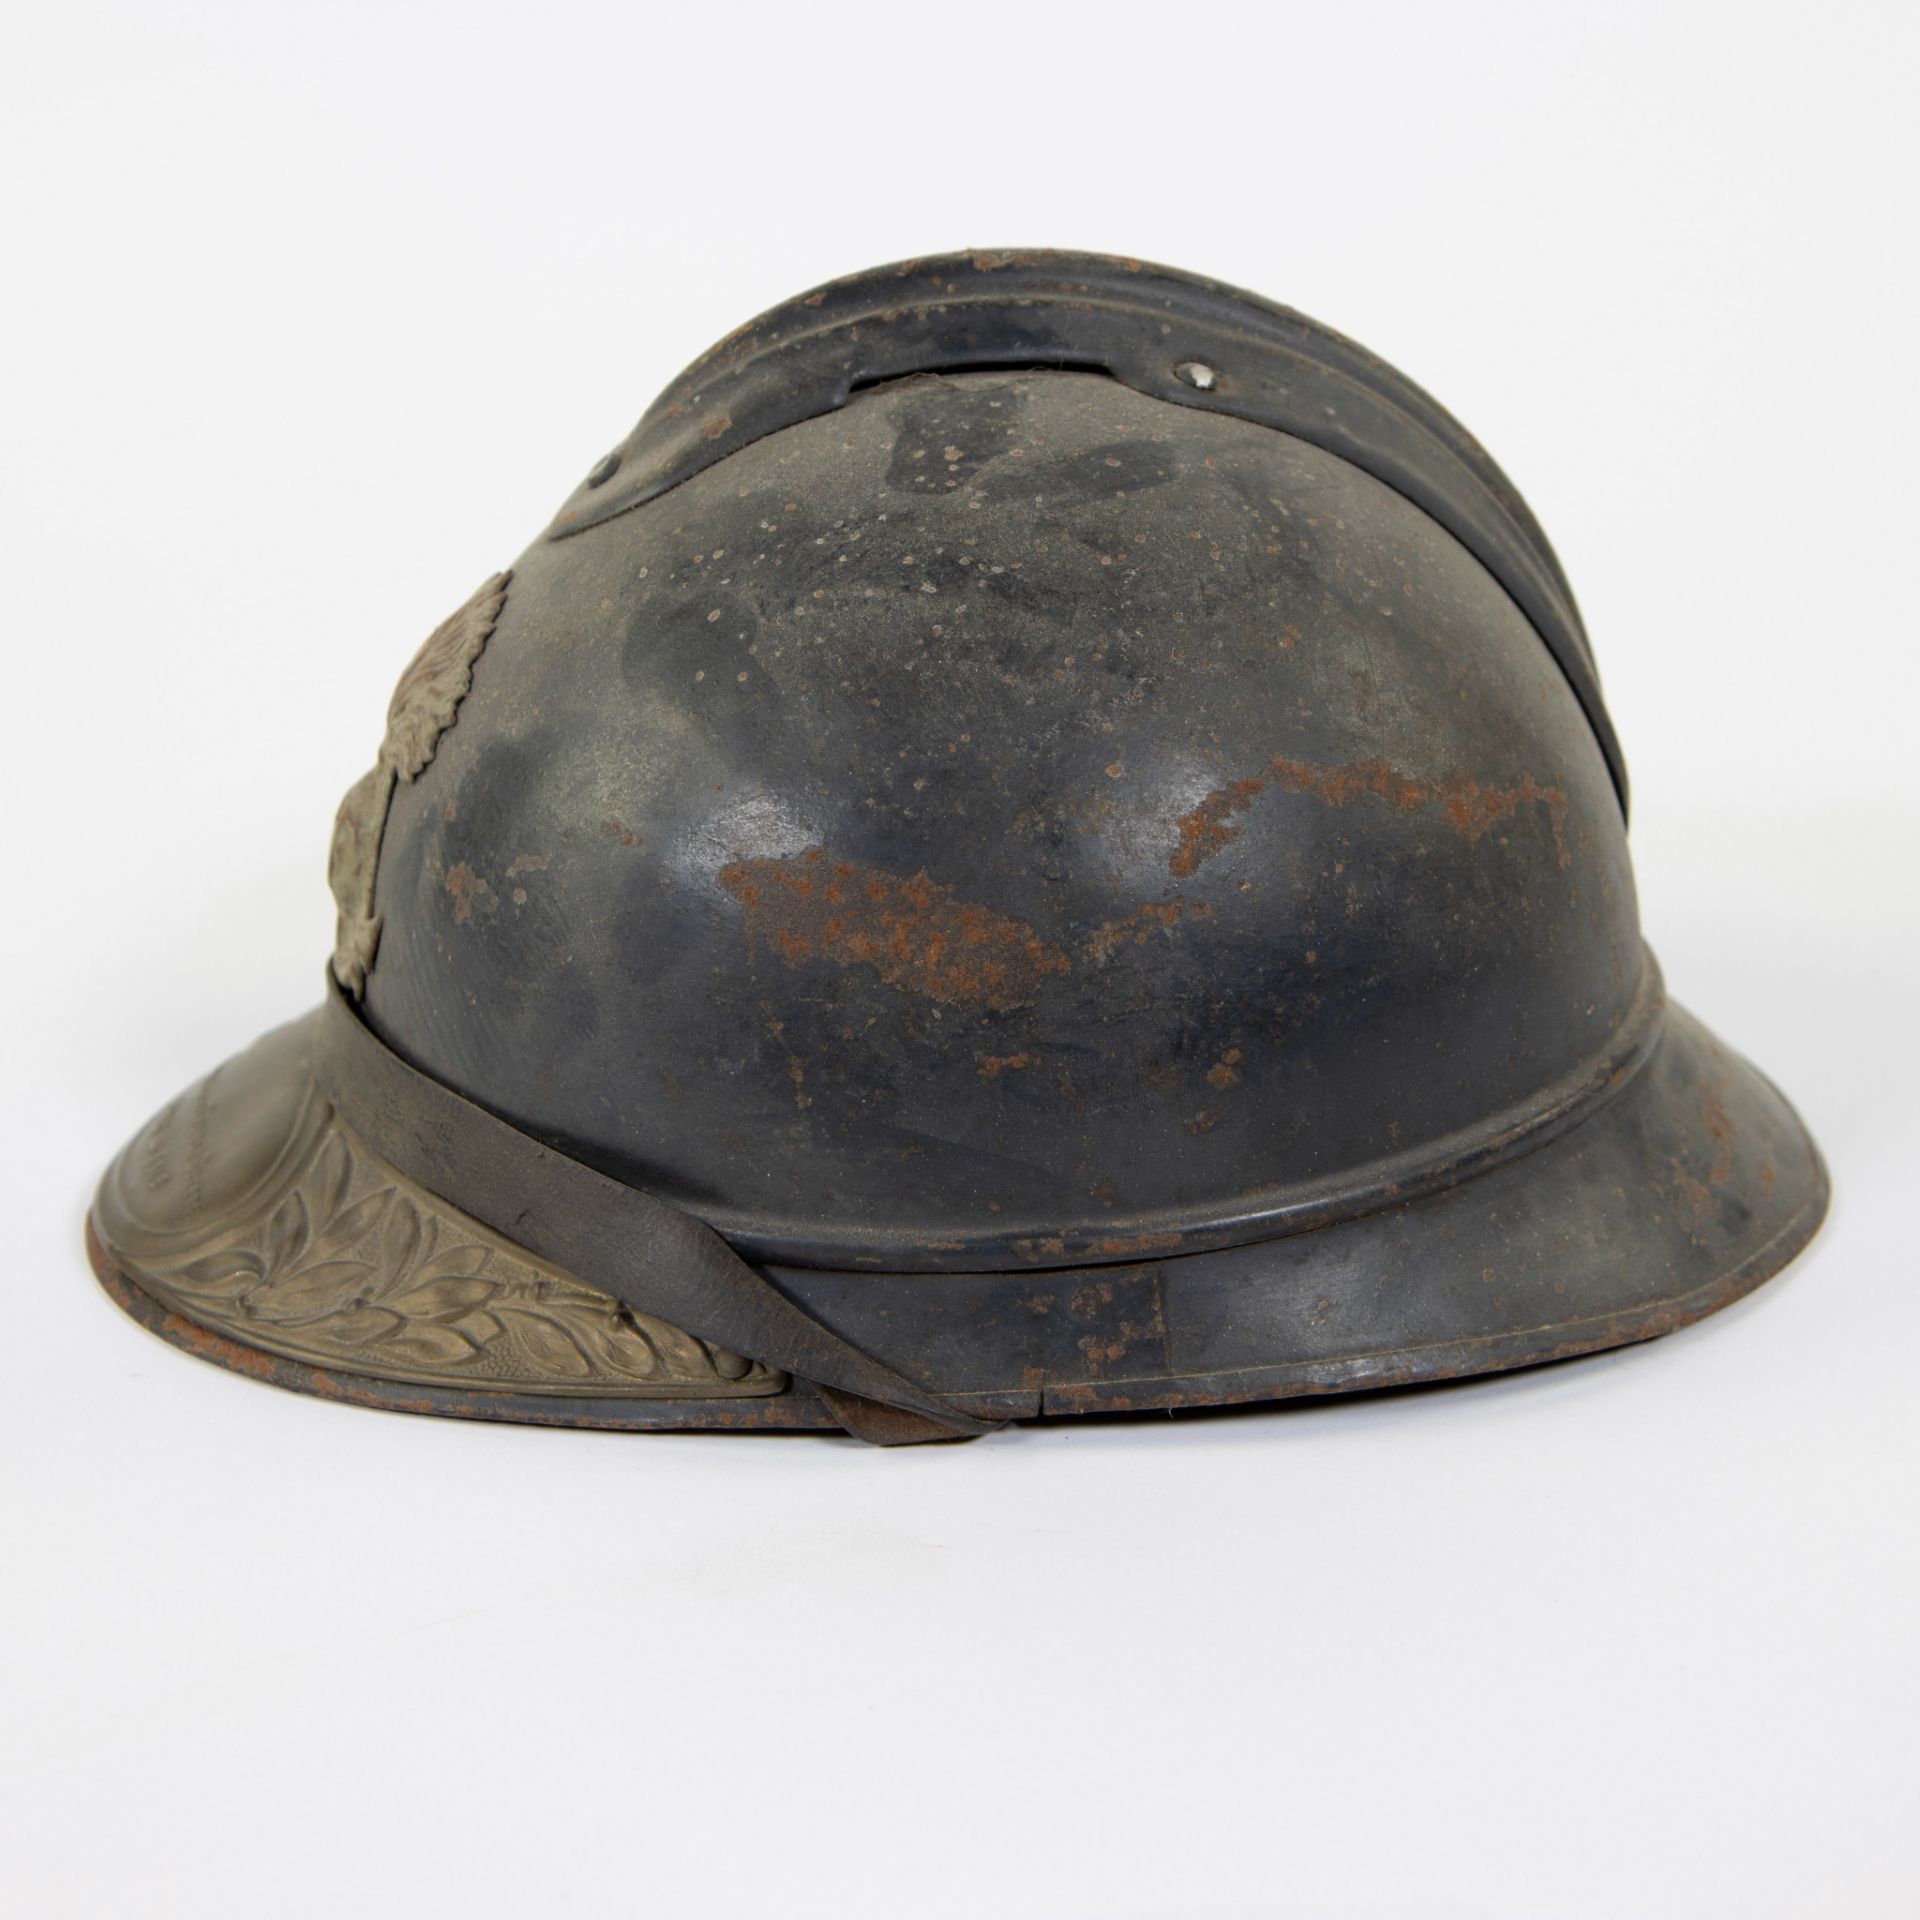 French helmet after WWI - Image 2 of 4